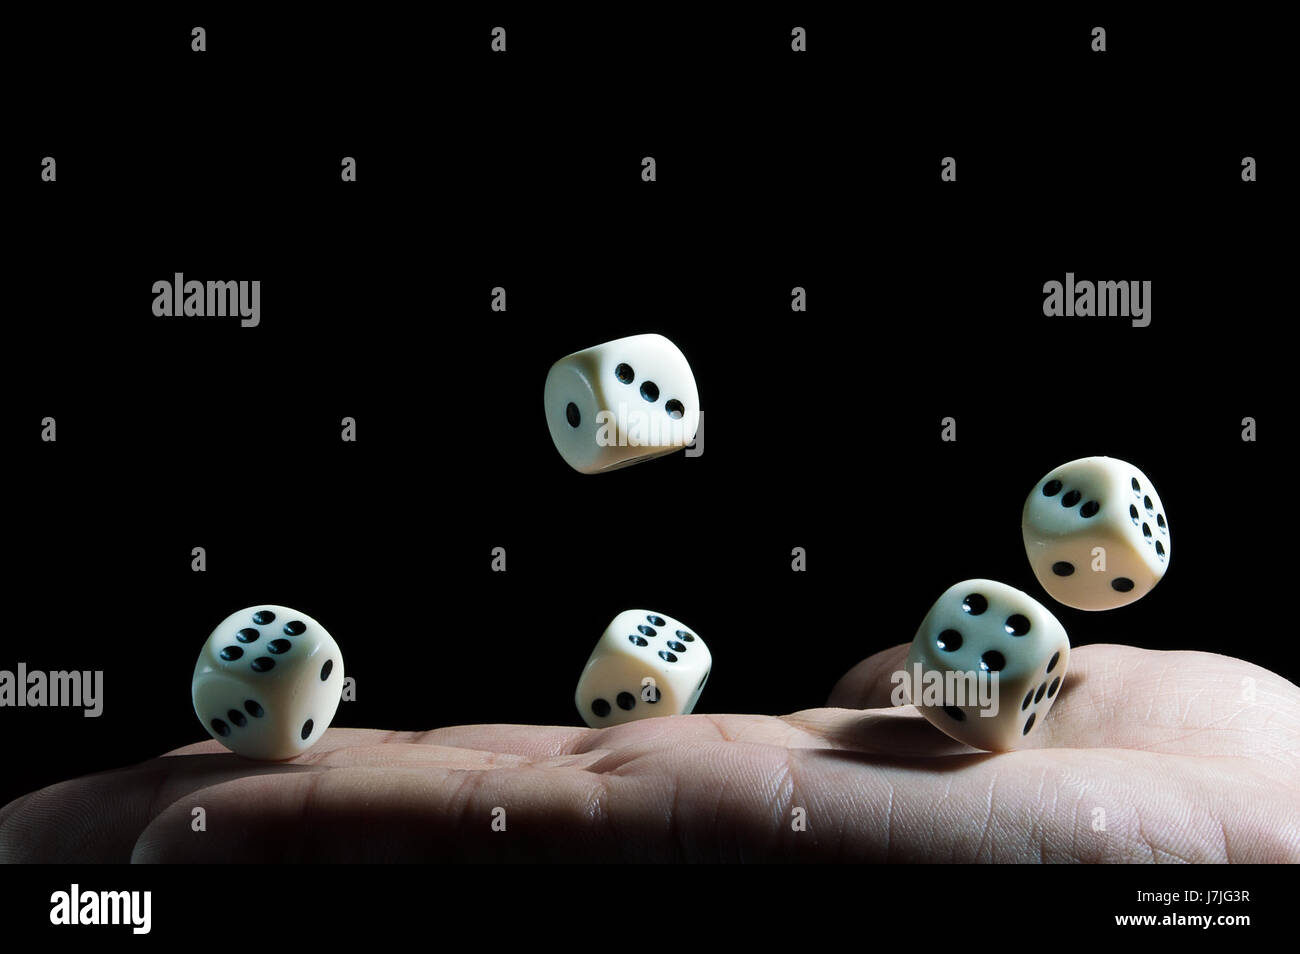 falling dice on the hand on black background Stock Photo